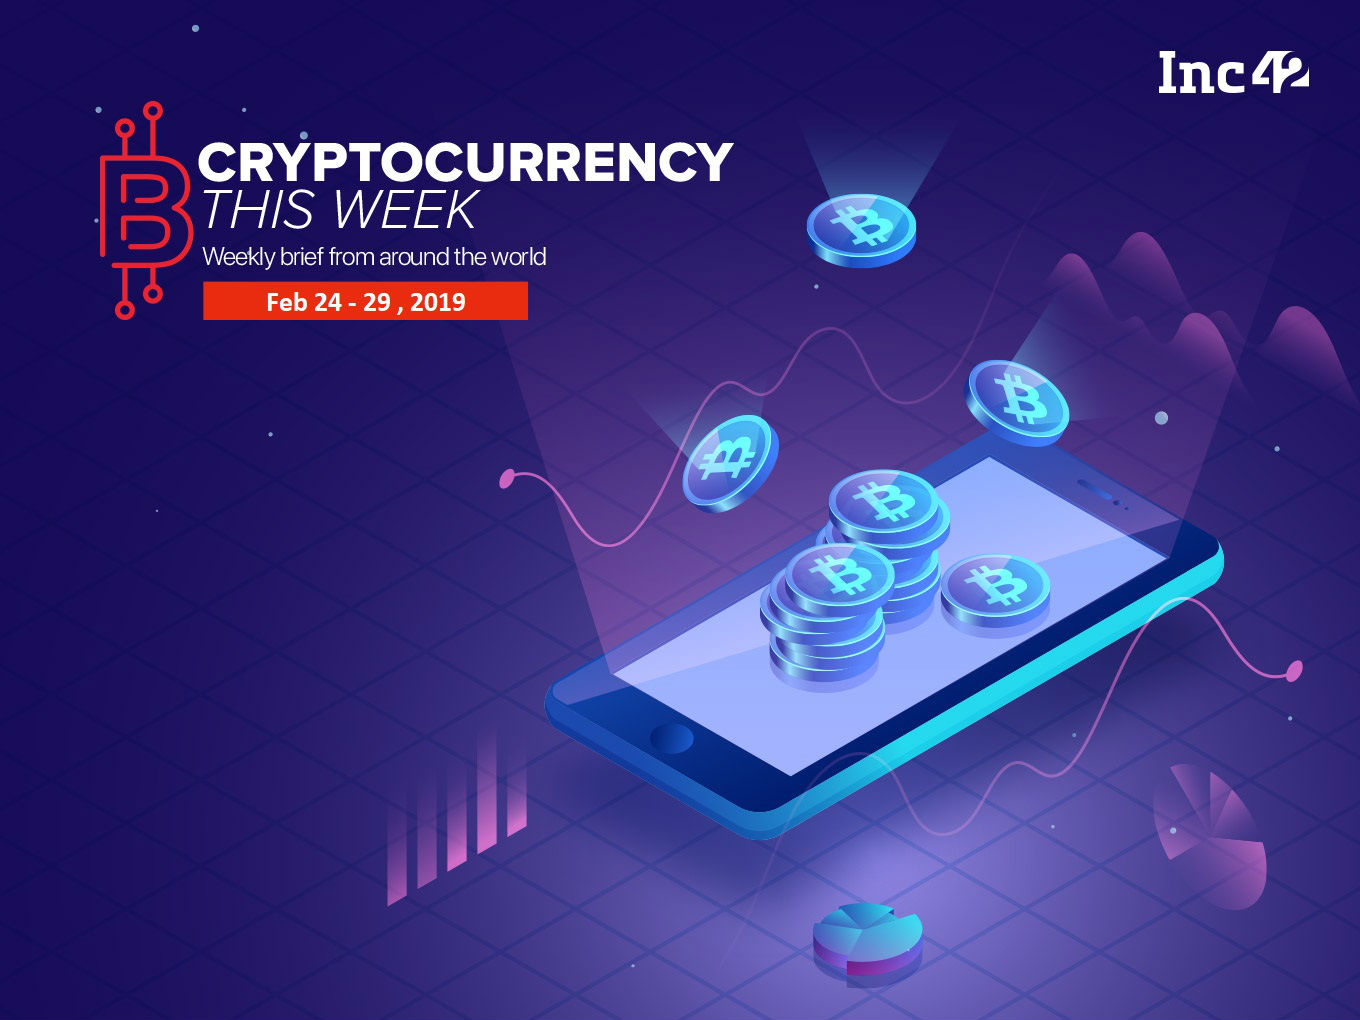 Cryptocurrency This Week: Indian Crypto Bulls Roadshow 2020, Buffett’s CLarification On Bitcoin And More